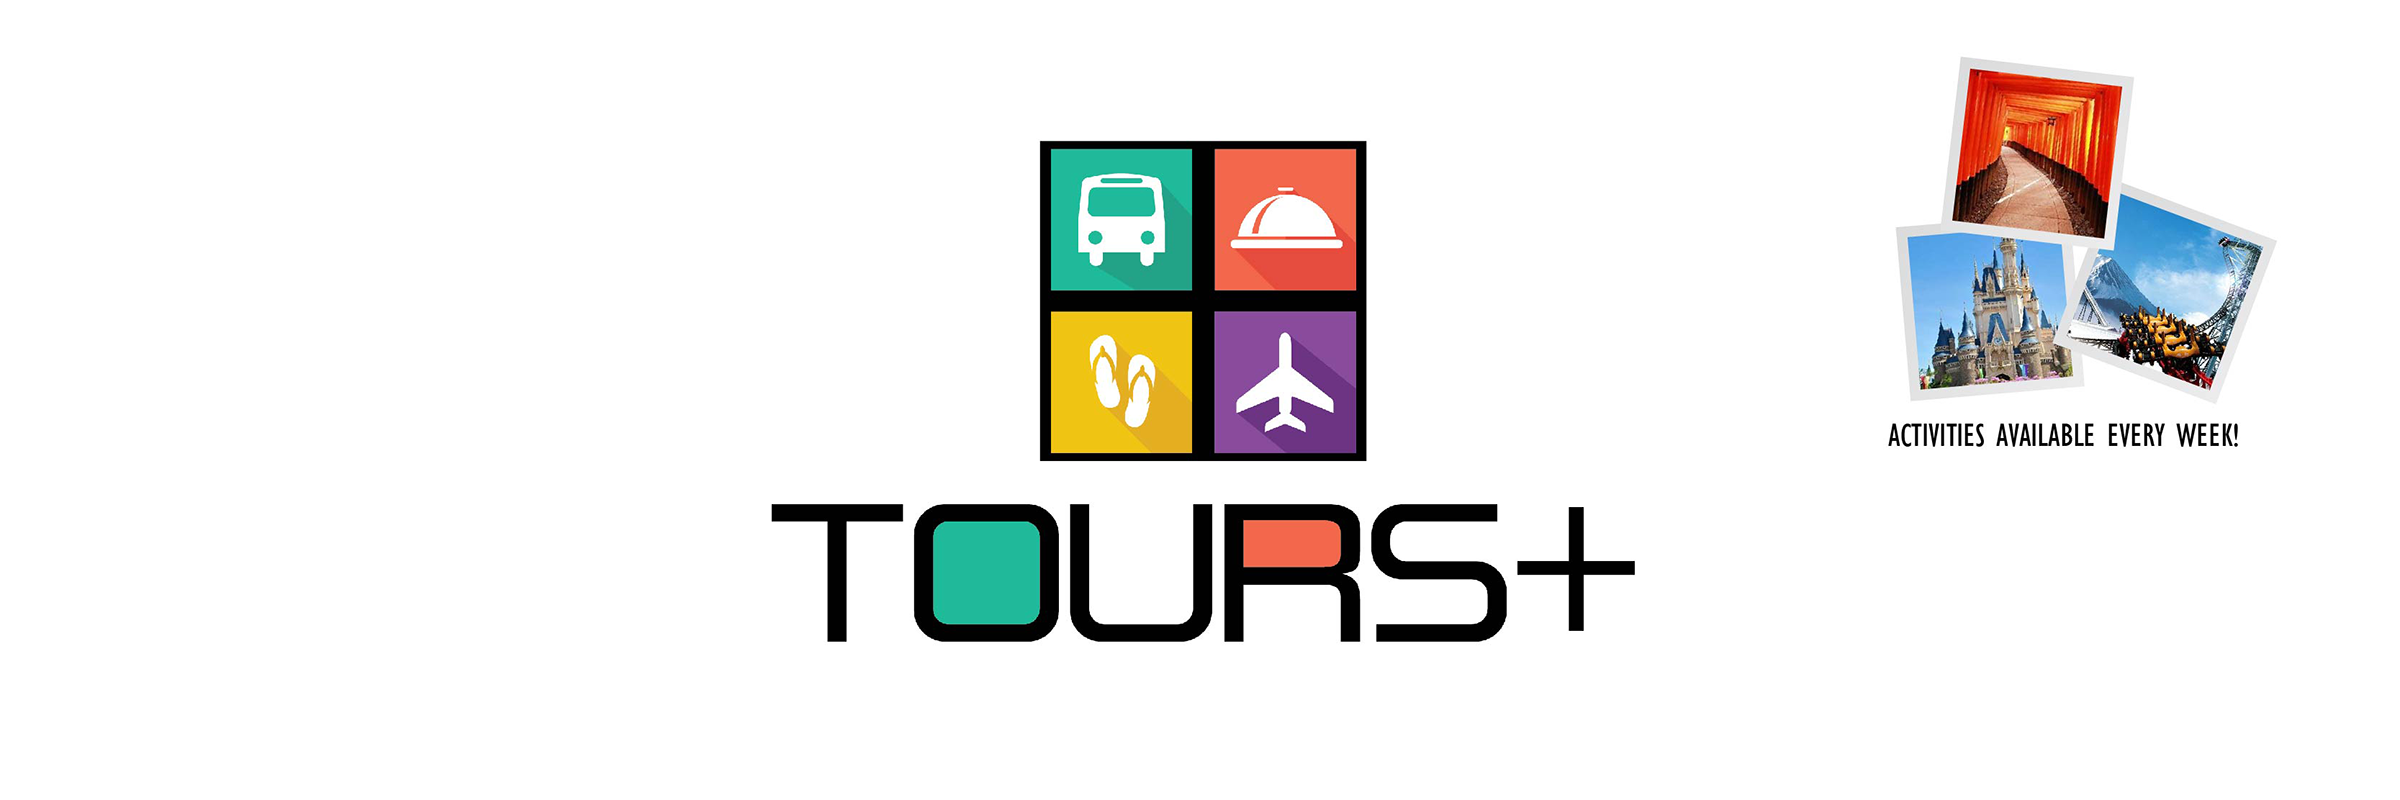 tours_banner.2400x800.png